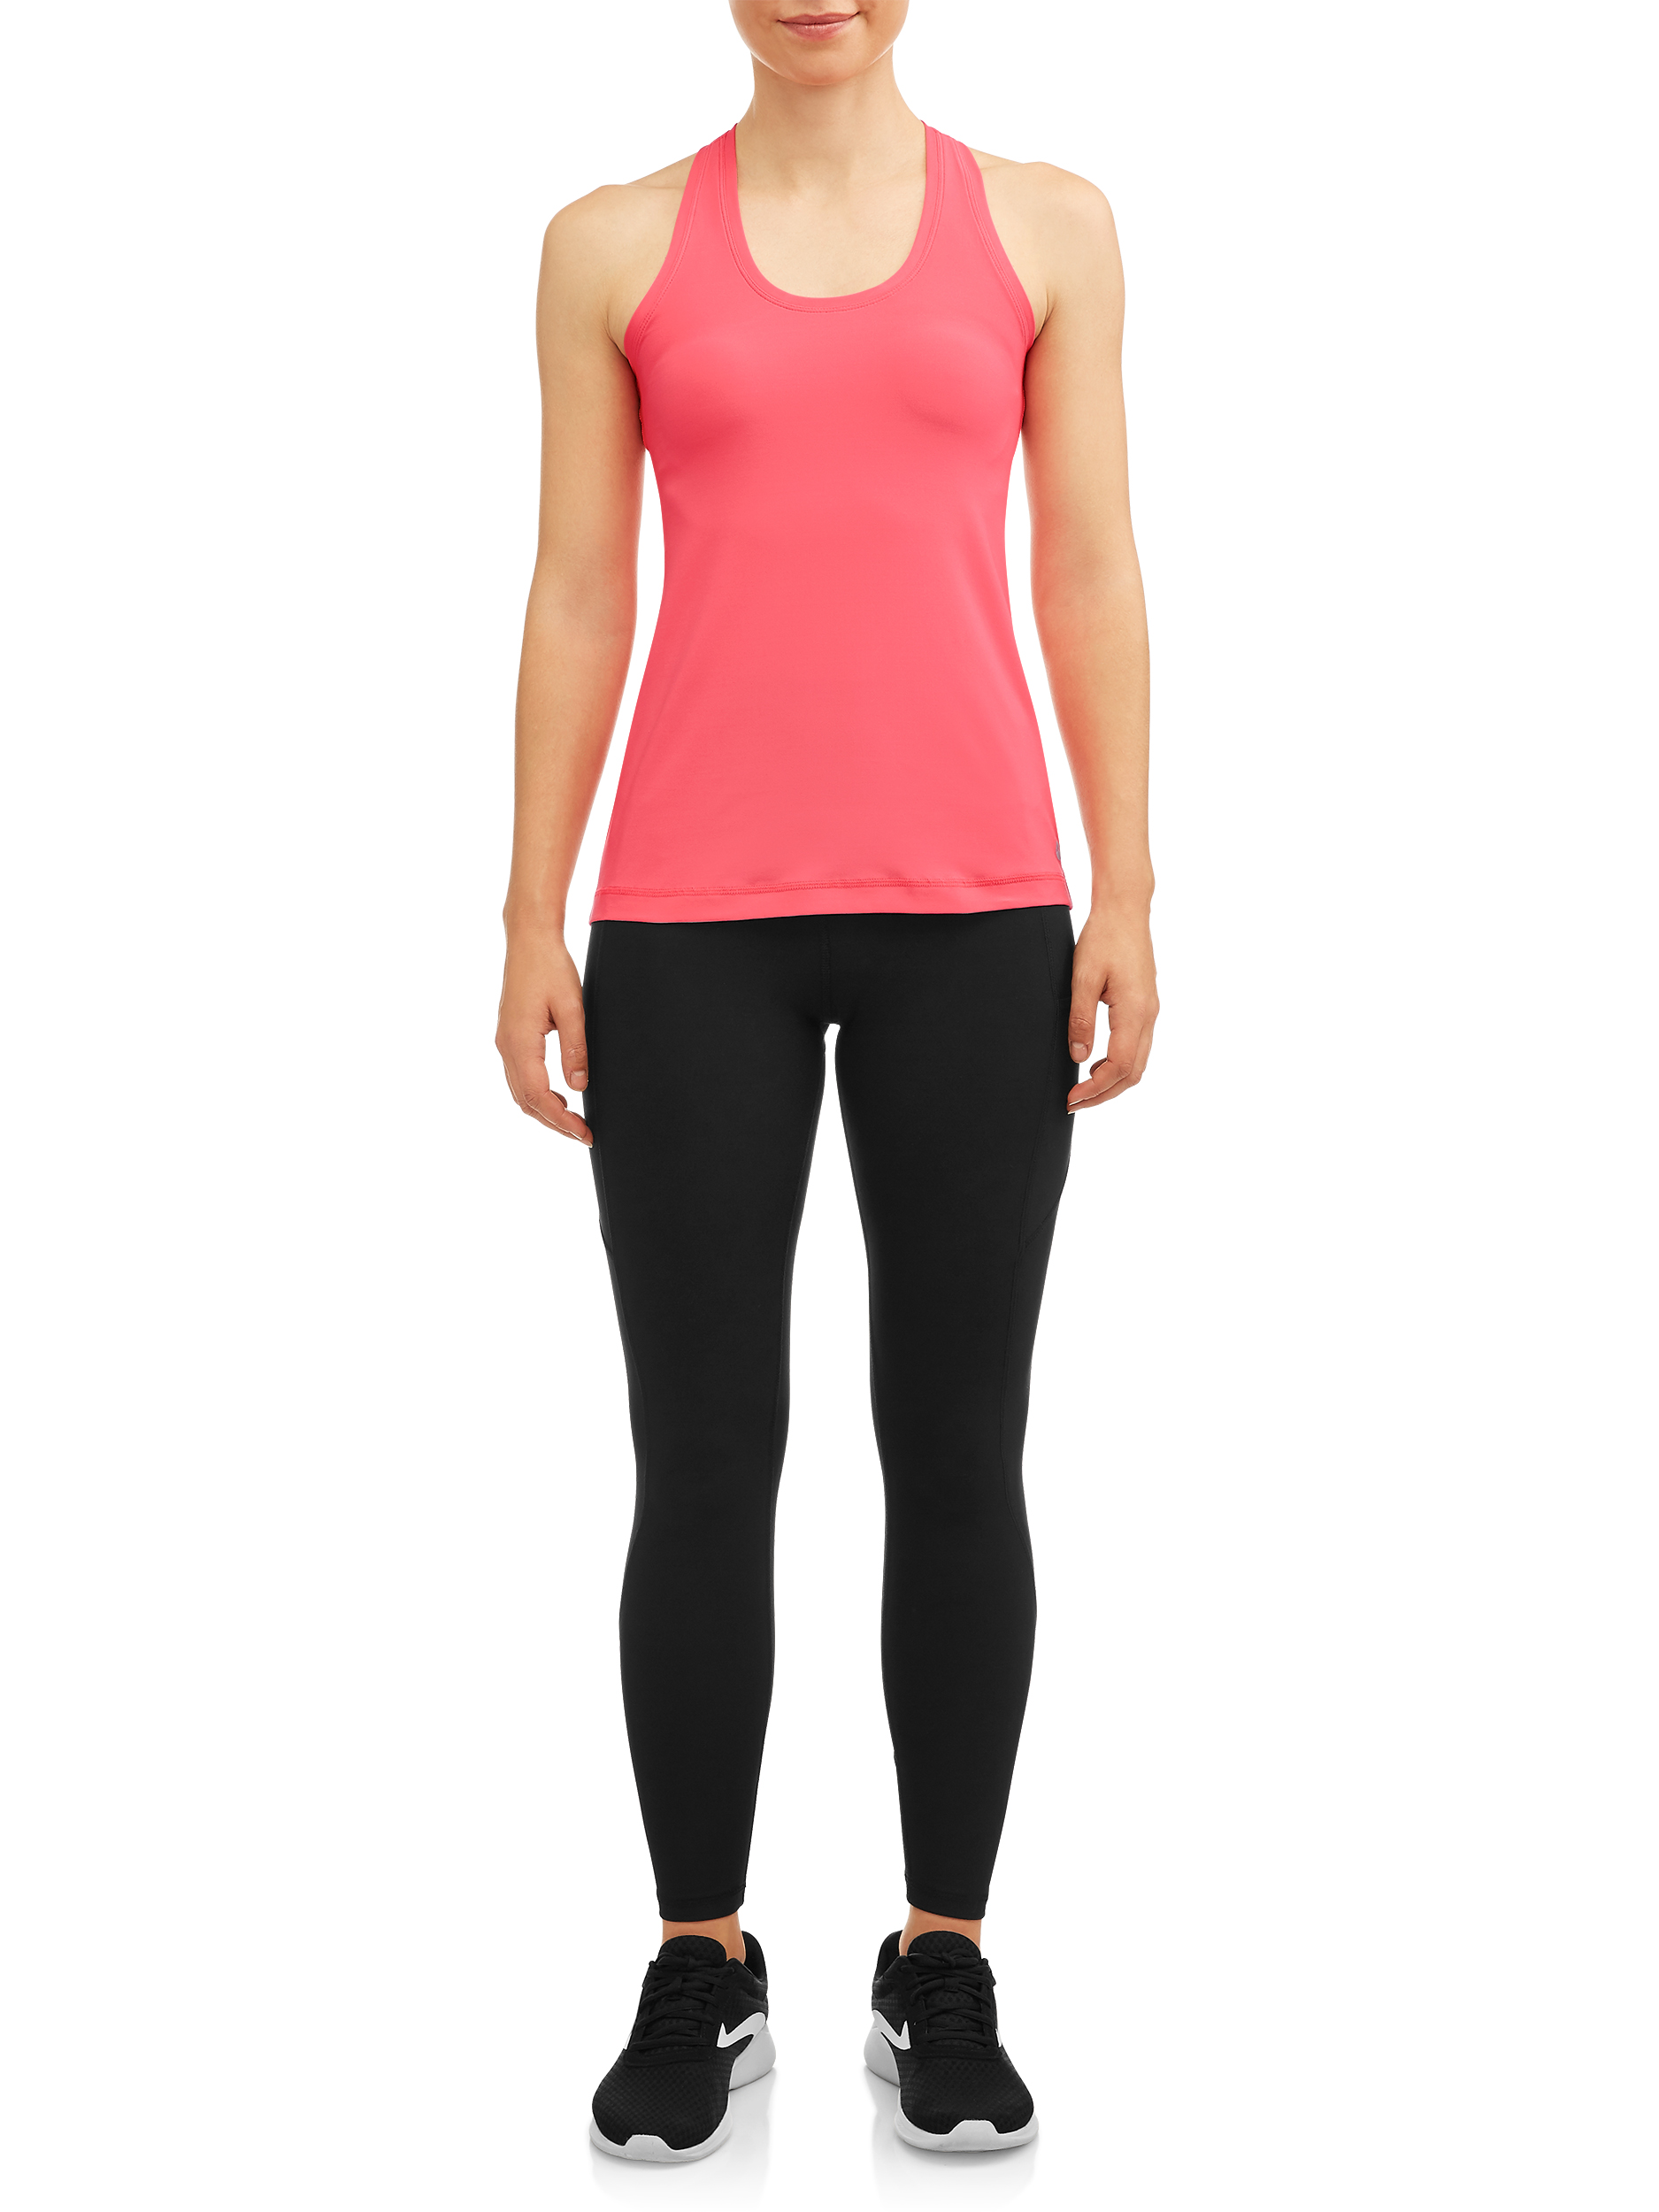 X by Gottex Women's Active Fitted Racer Back Tank Top - image 2 of 4